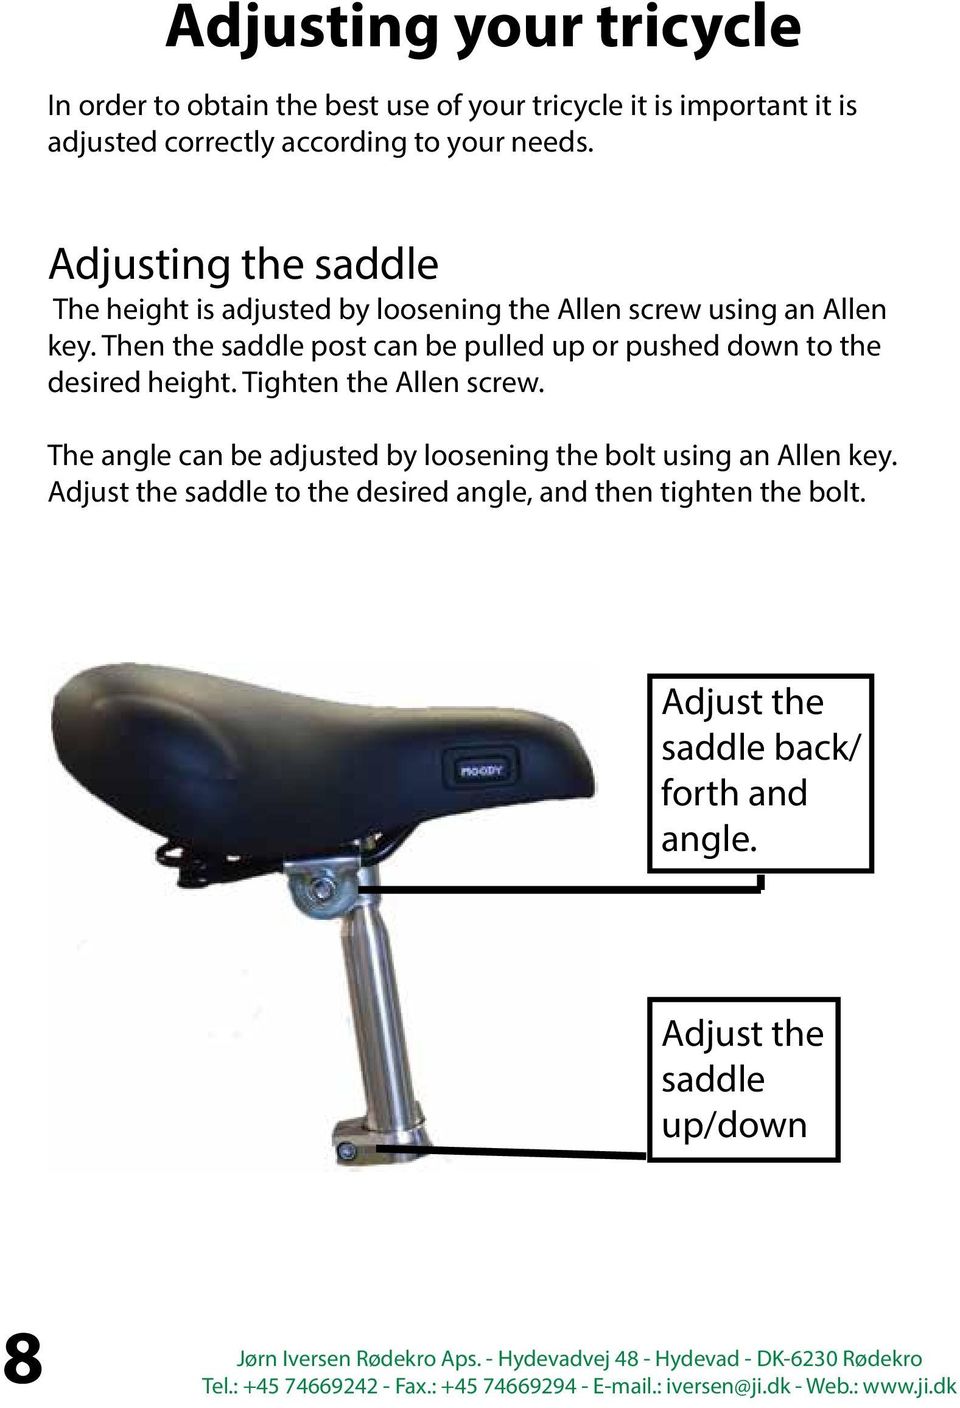 Then the saddle post can be pulled up or pushed down to the desired height. Tighten the Allen screw.